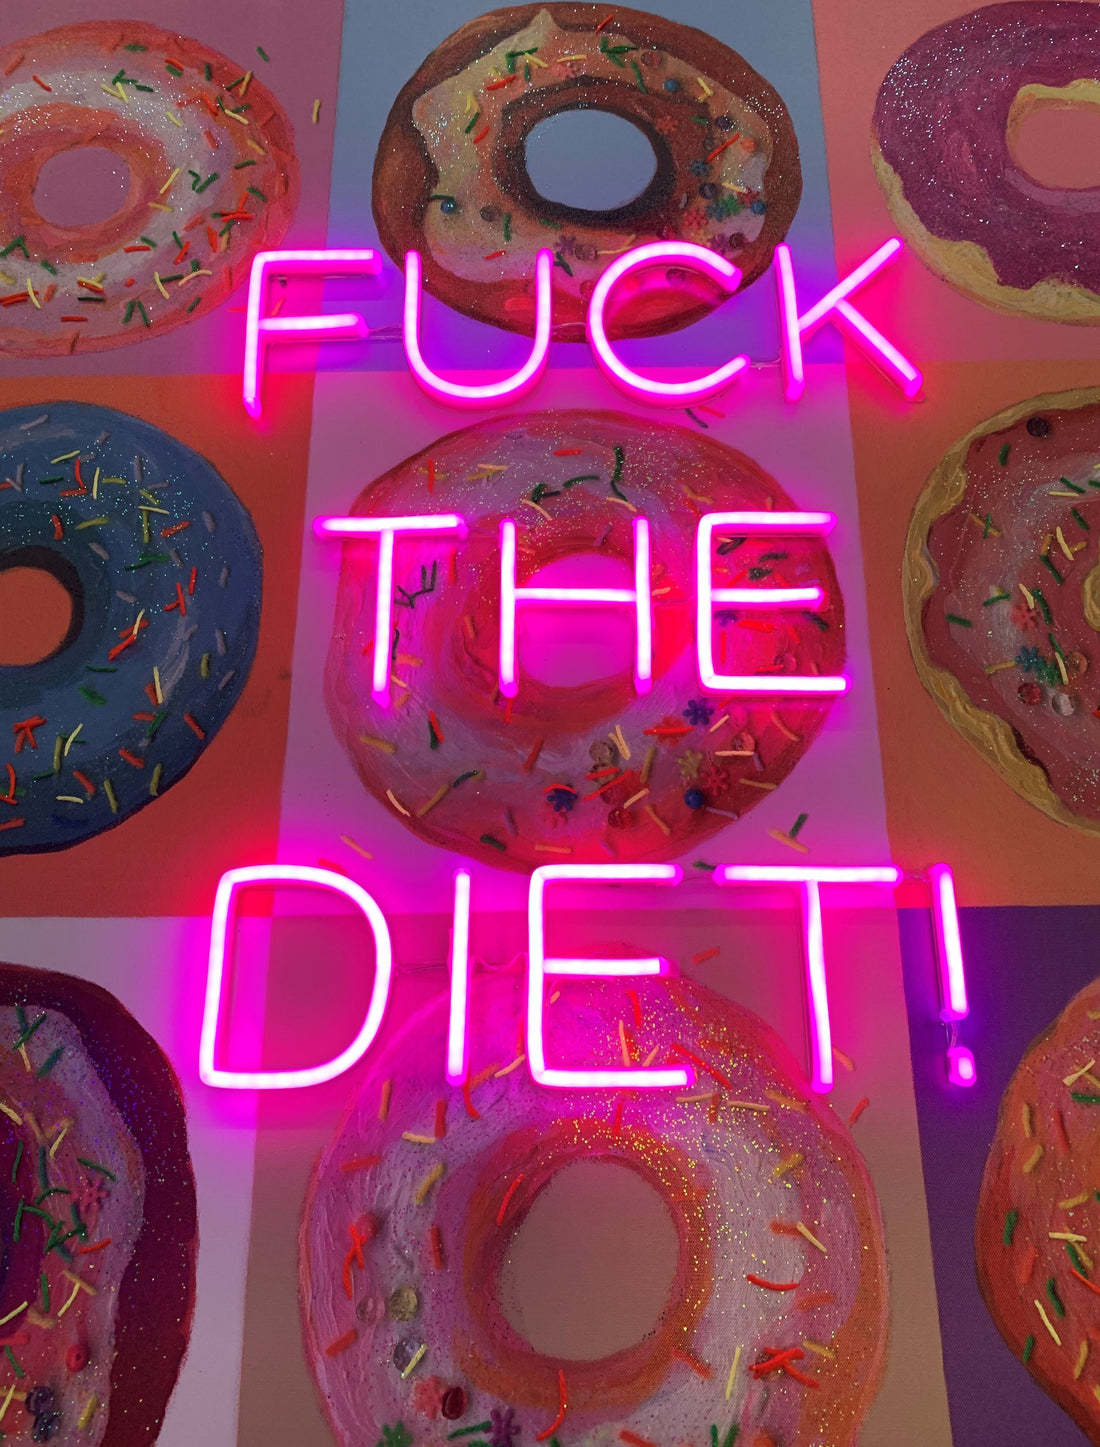 'F the Diet' Wall Artwork with LED Neon (R rated) - SMALL